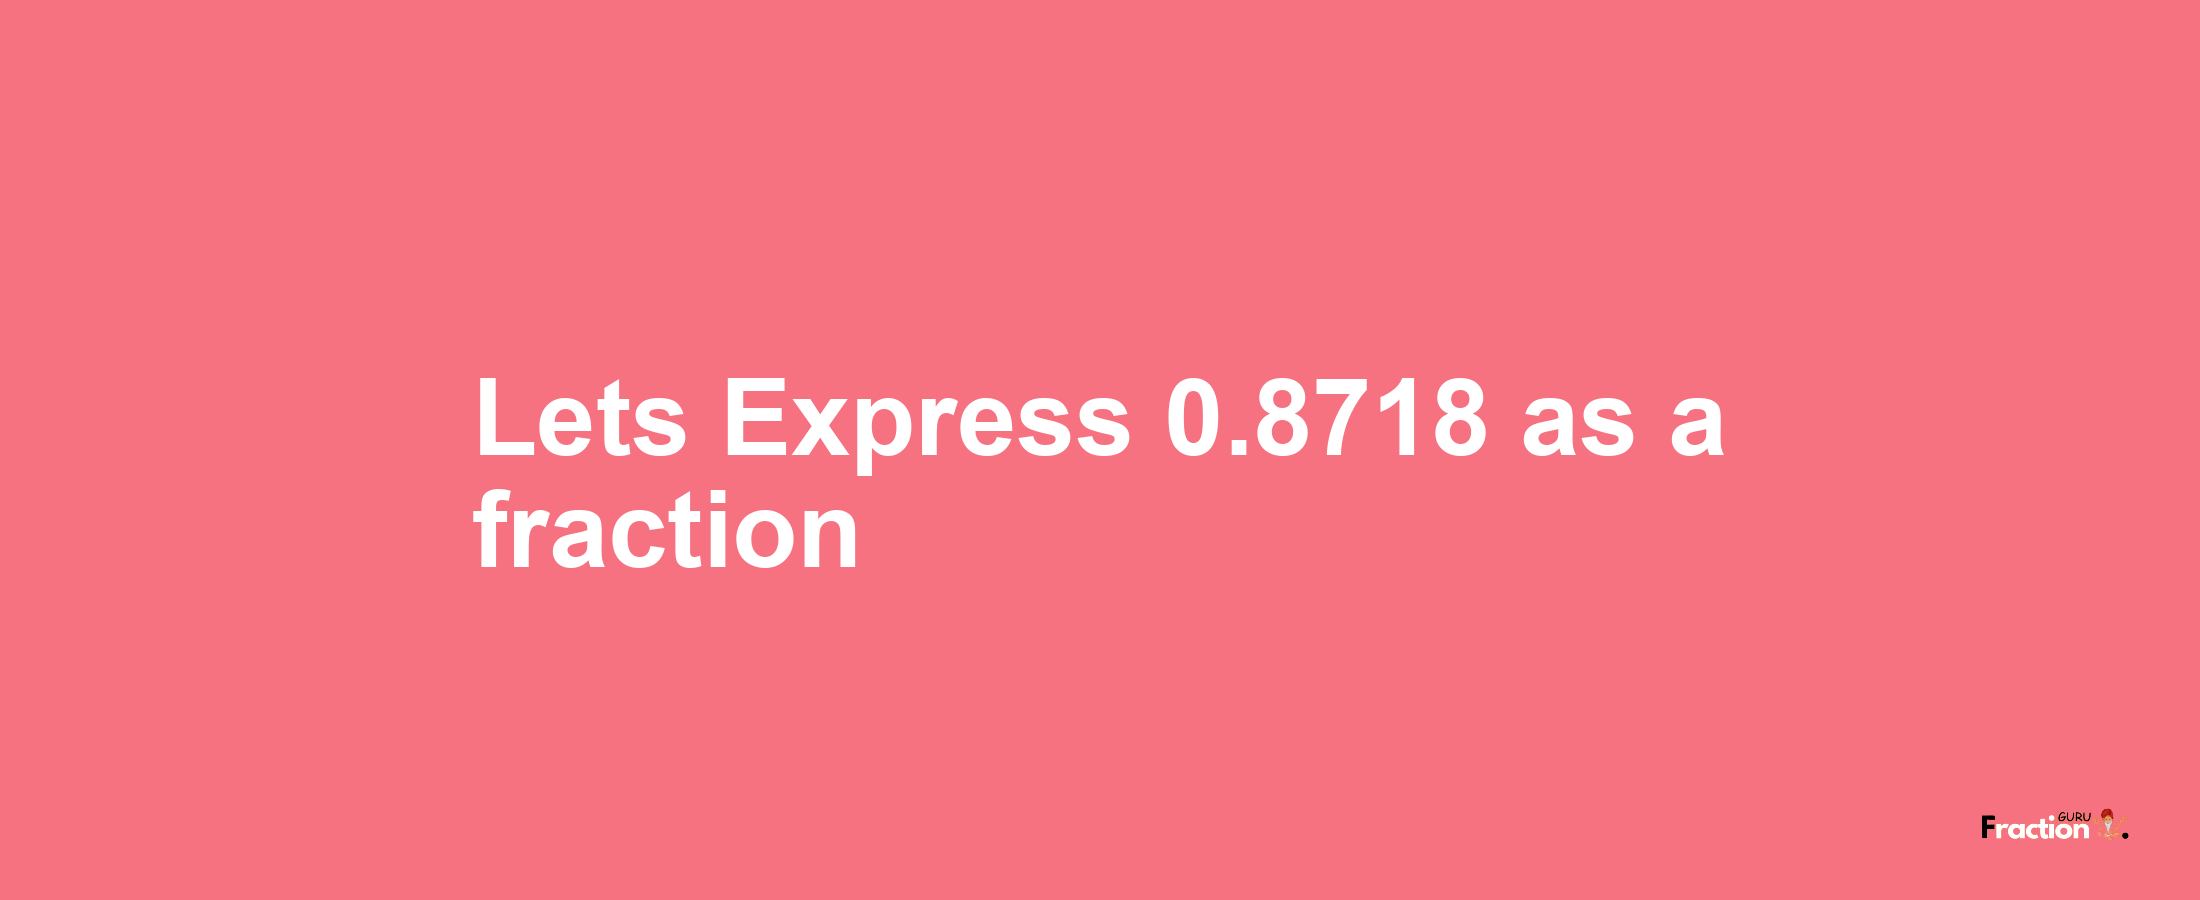 Lets Express 0.8718 as afraction